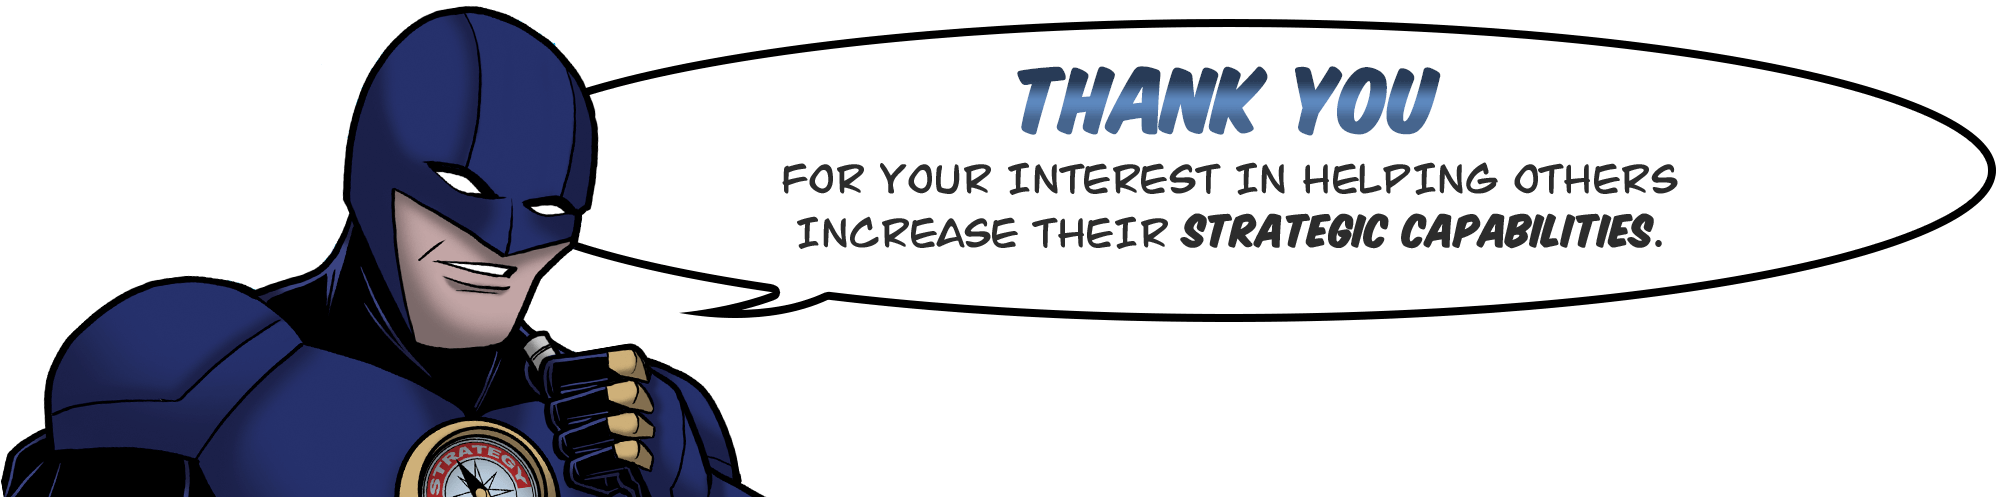 Thank you for your interest in helping others increase their strategic capabilities.